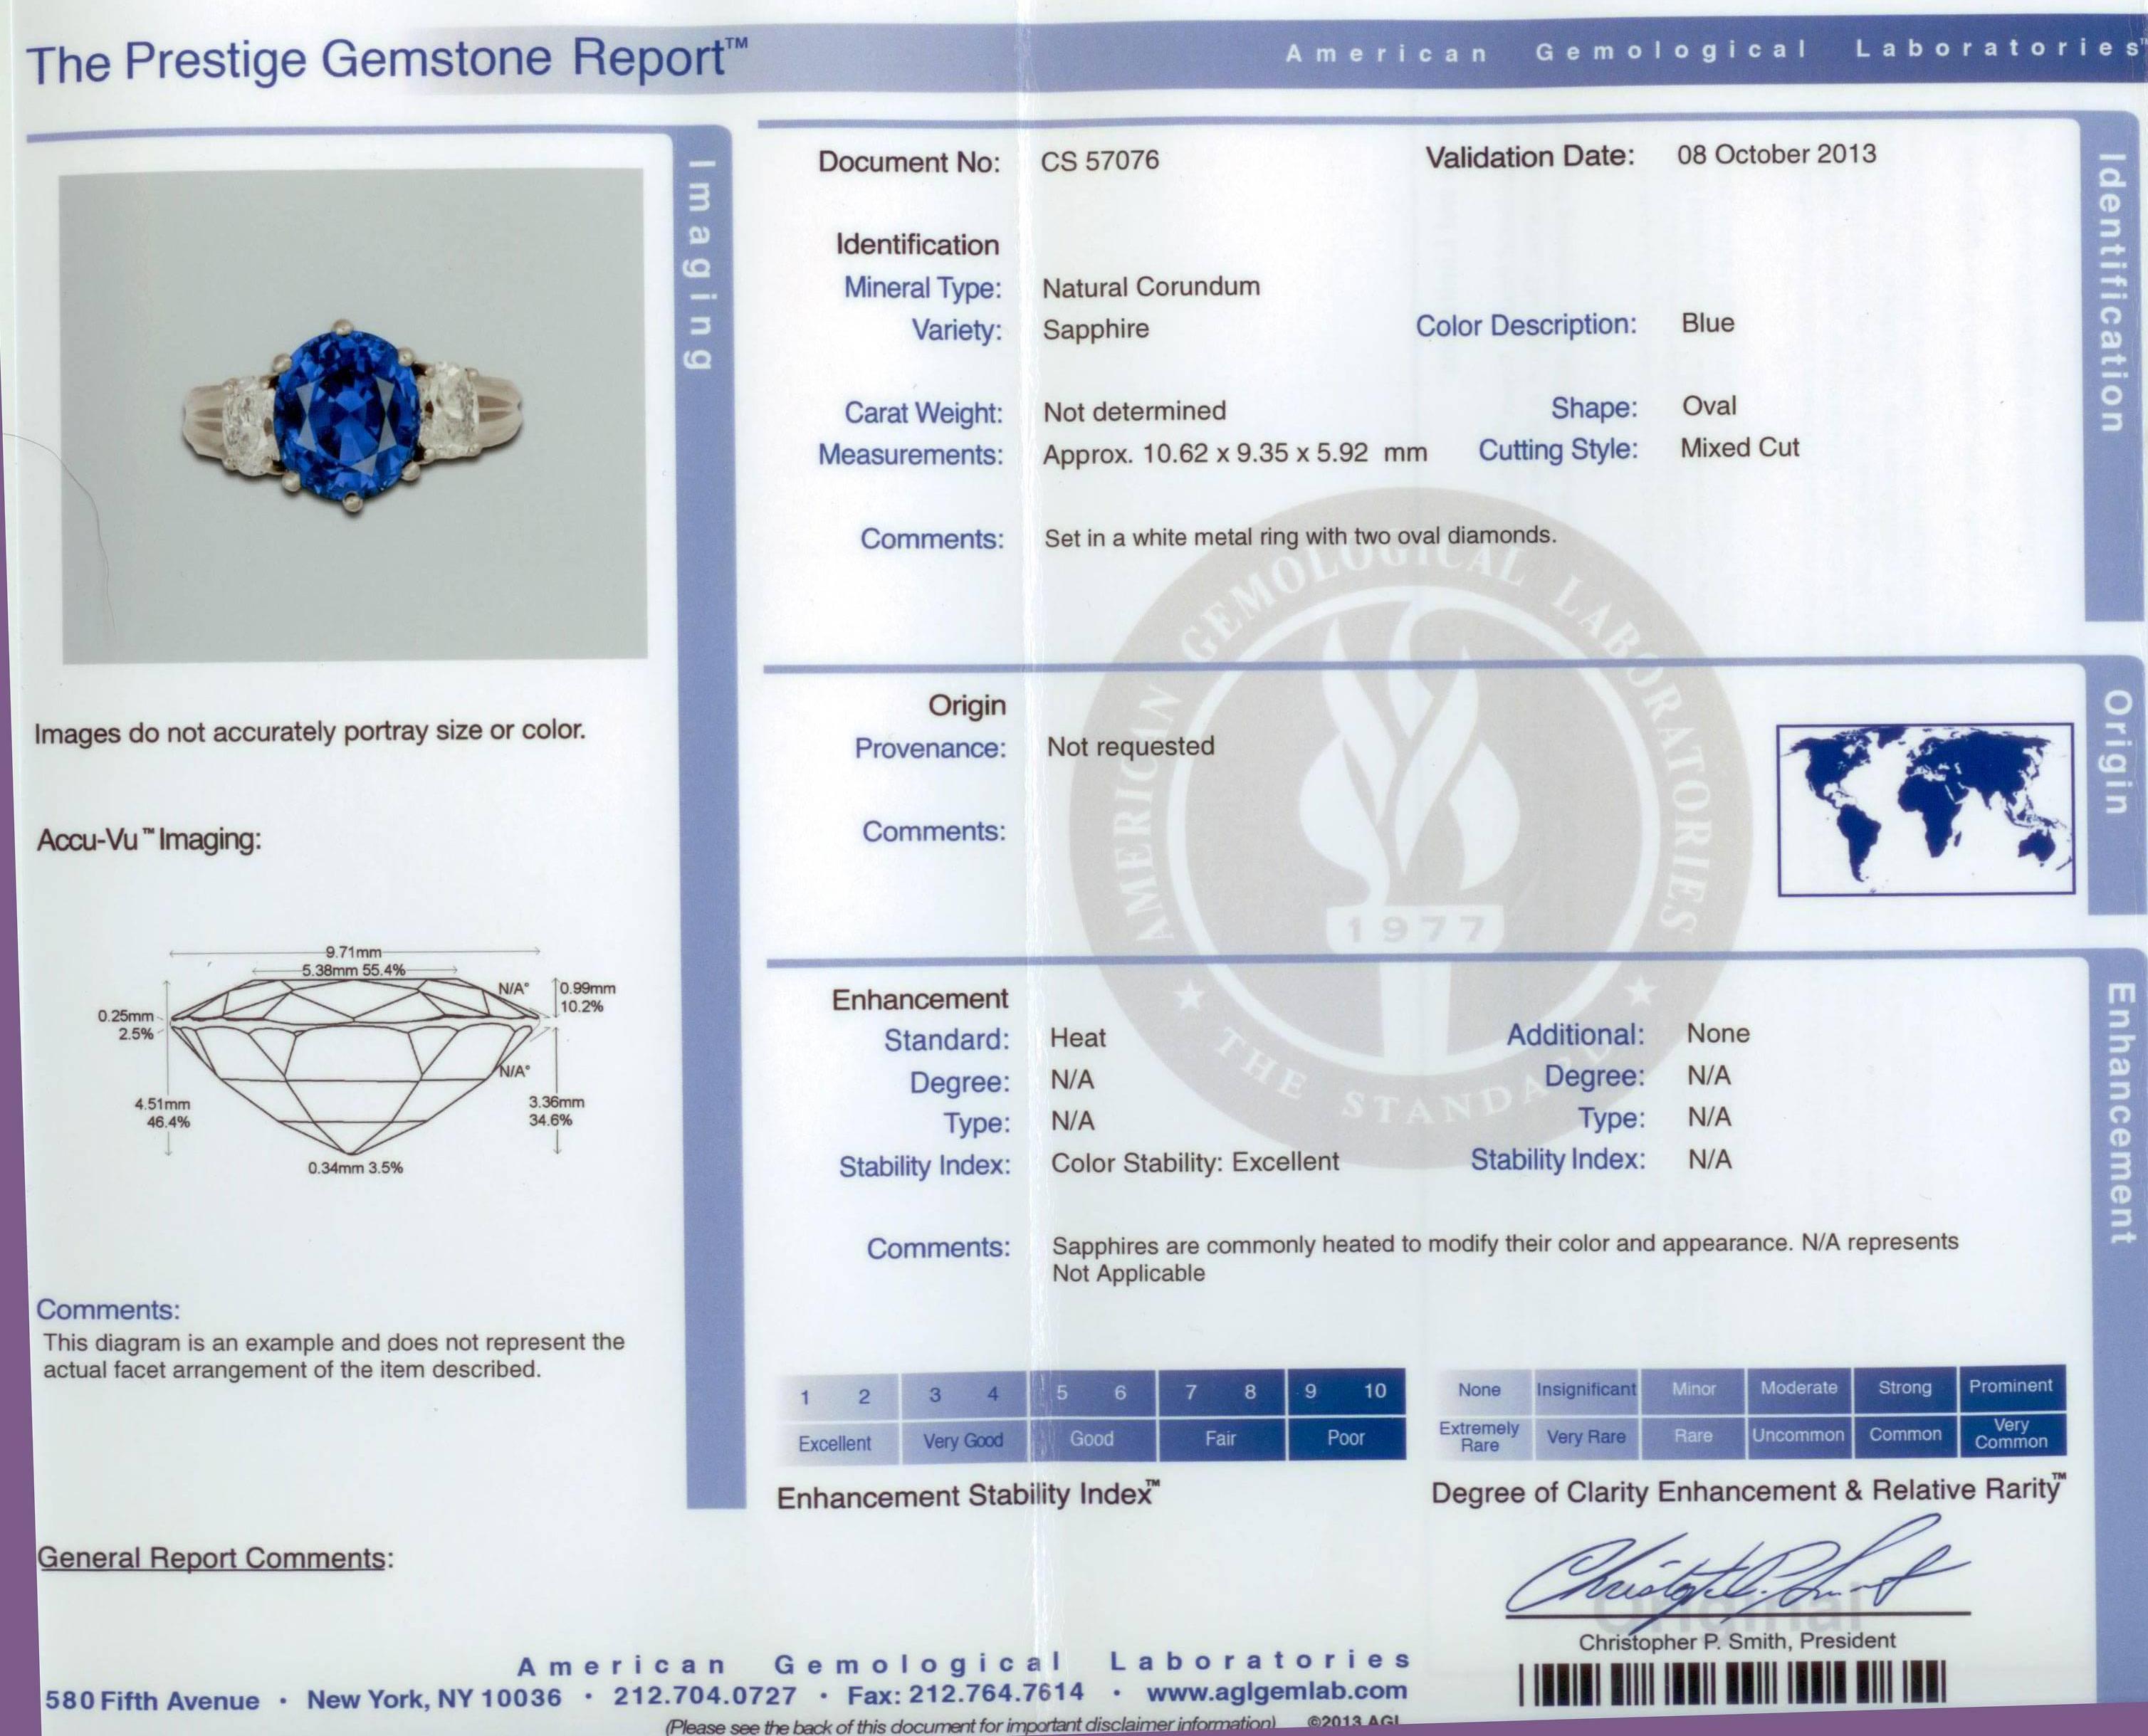 Platinum ring containing a 5.50ct oval cut sapphire flanked by 2 oval cut diamonds weighing approximately 1ct, F color, VS clarity.

Metal weight: 11.50 grams

This diamond and sapphire ring is accompanied by a retail appraisal performed by a